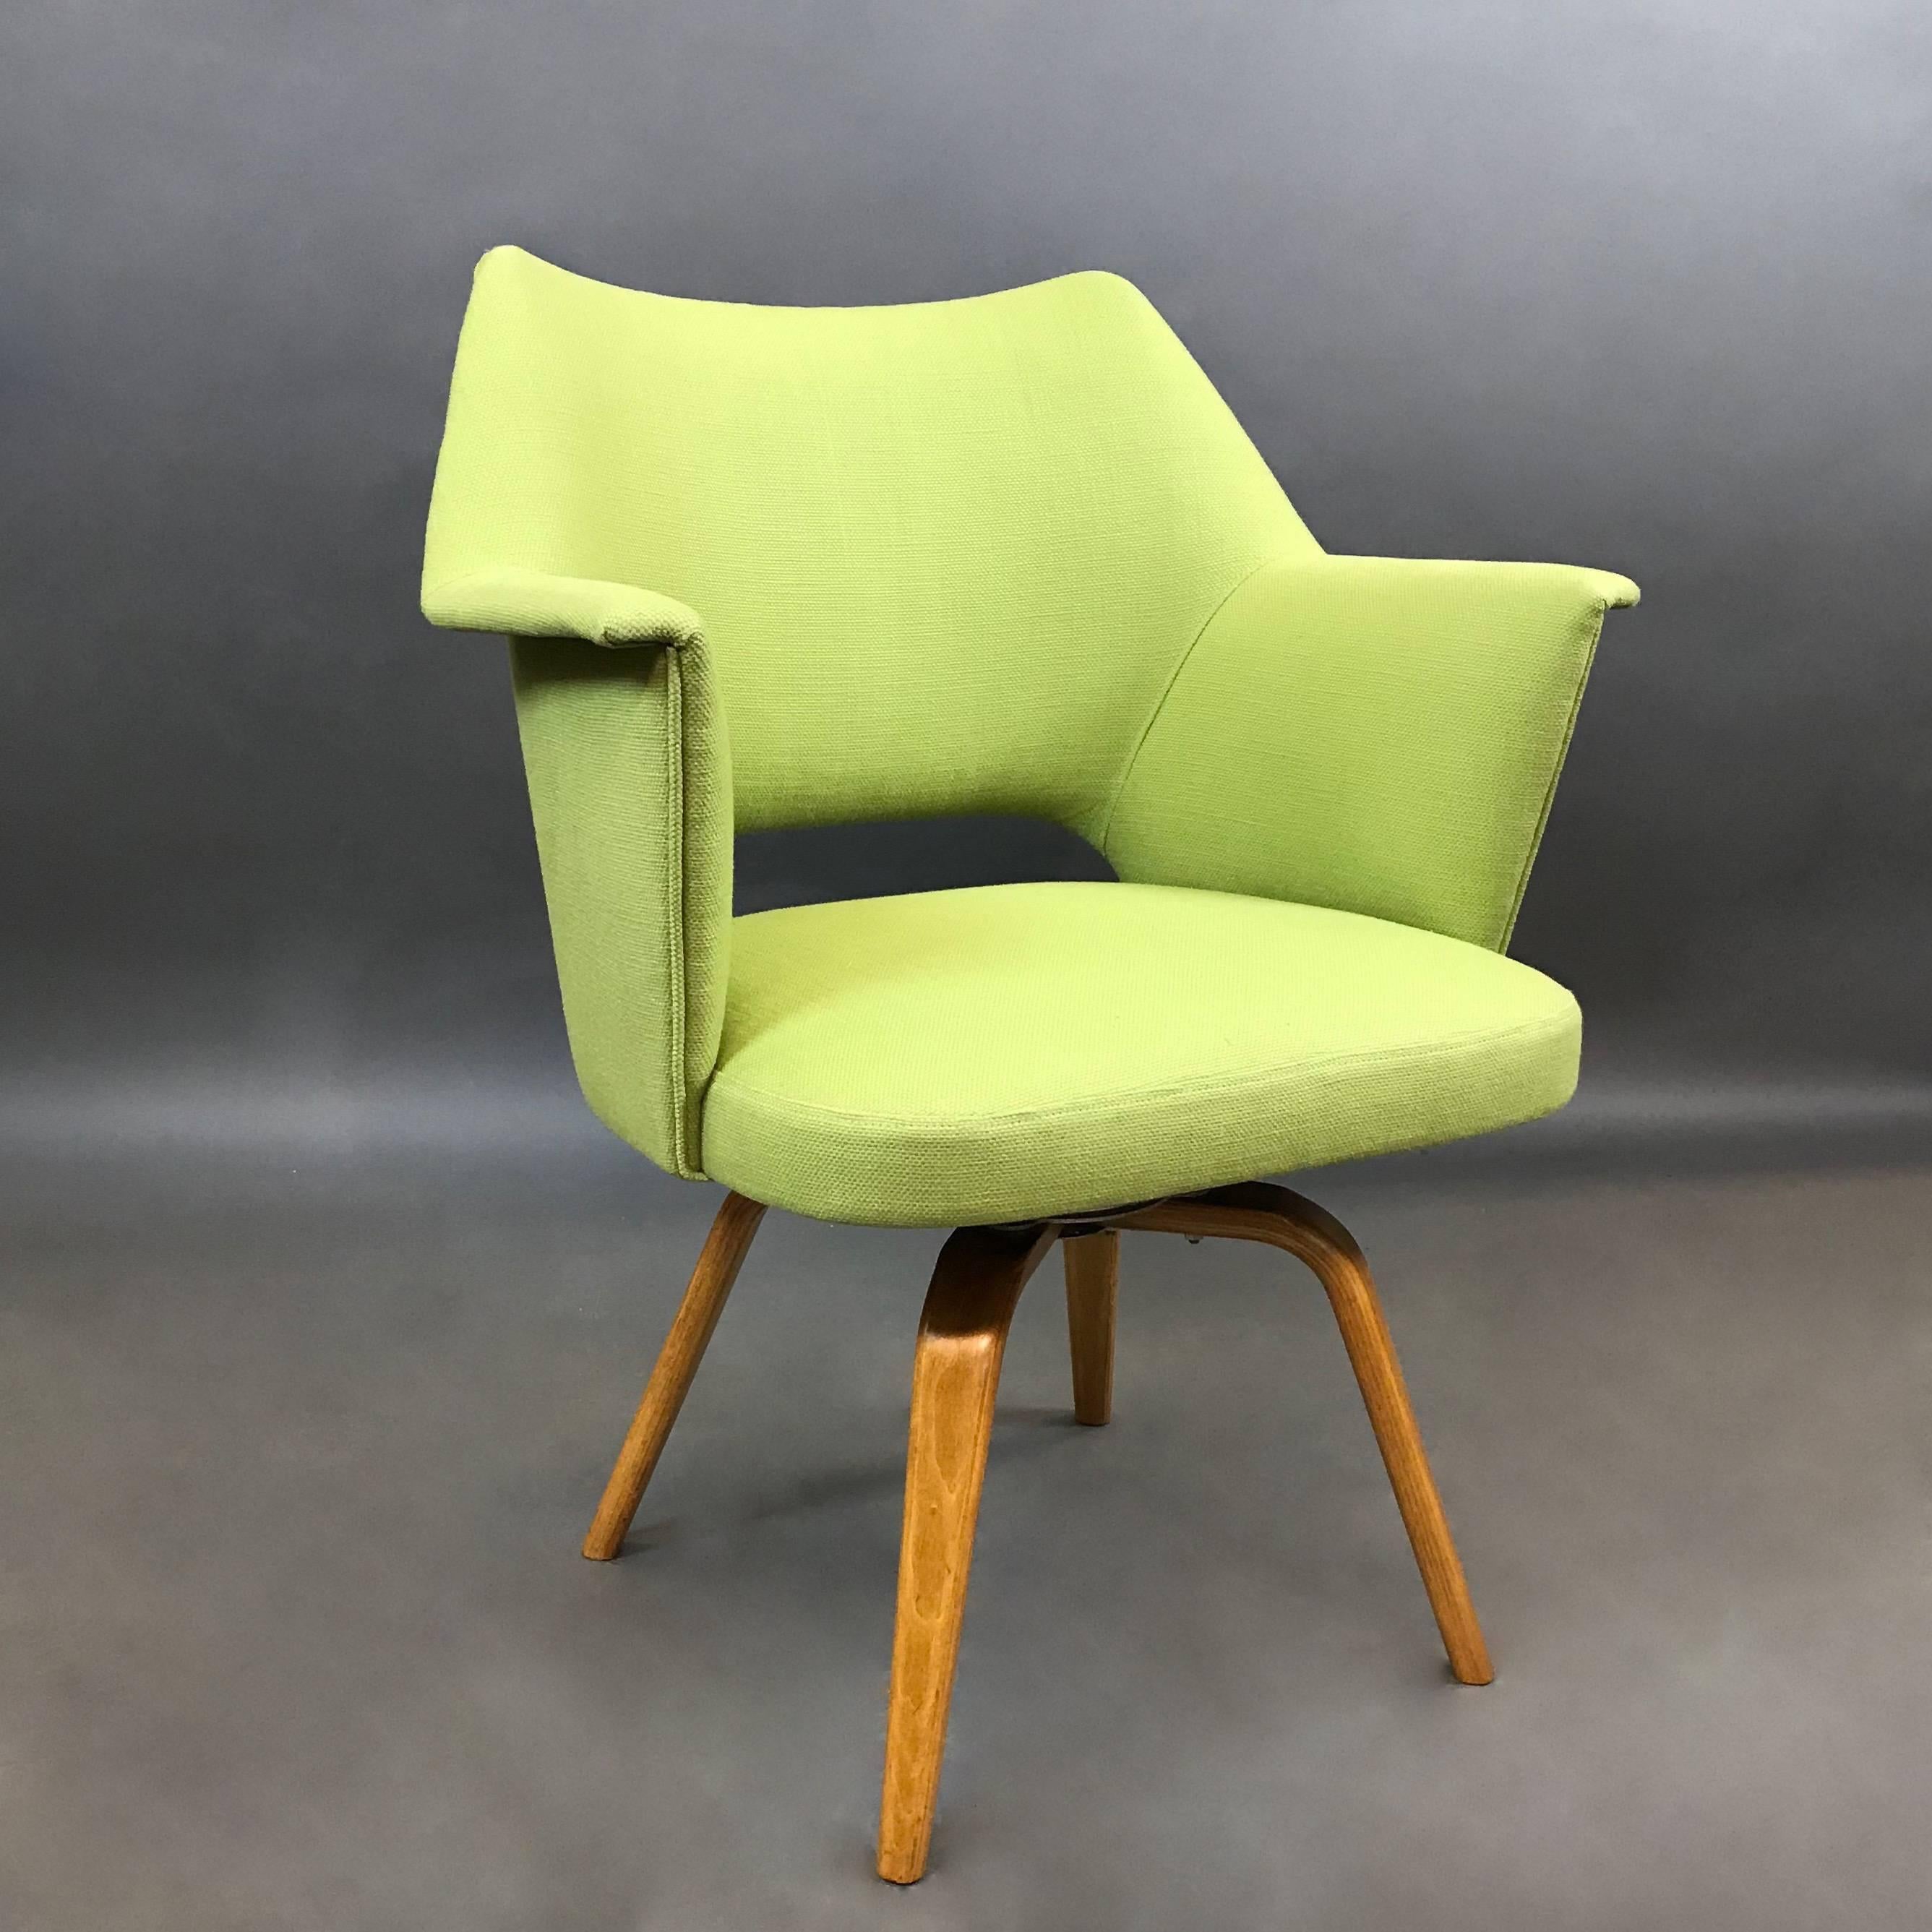 Mid-Century Modern, swivel armchair by Thonet features bright green cotton linen upholstery atop a bent maple, four leg base. Arm height is 25.5 in.